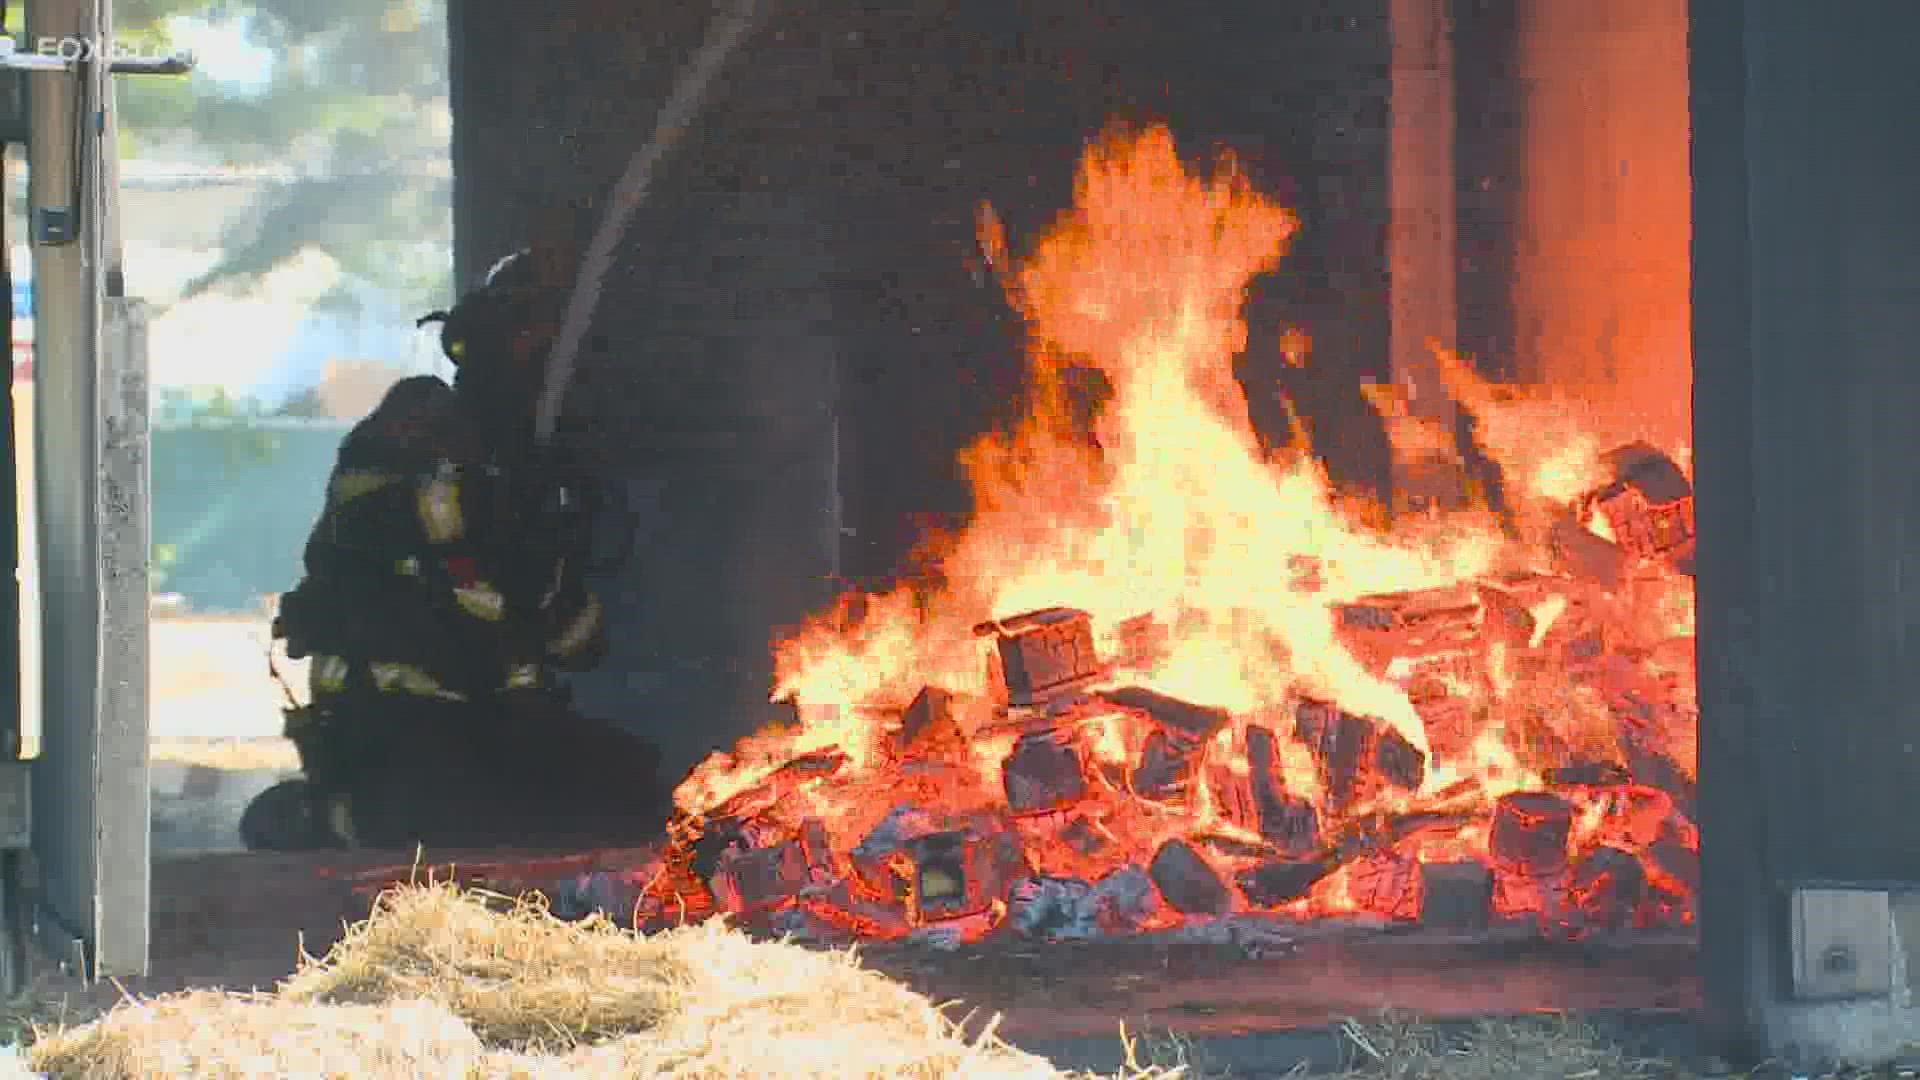 "Burn School" is used by various departments to help them become more adept at fighting real fires.